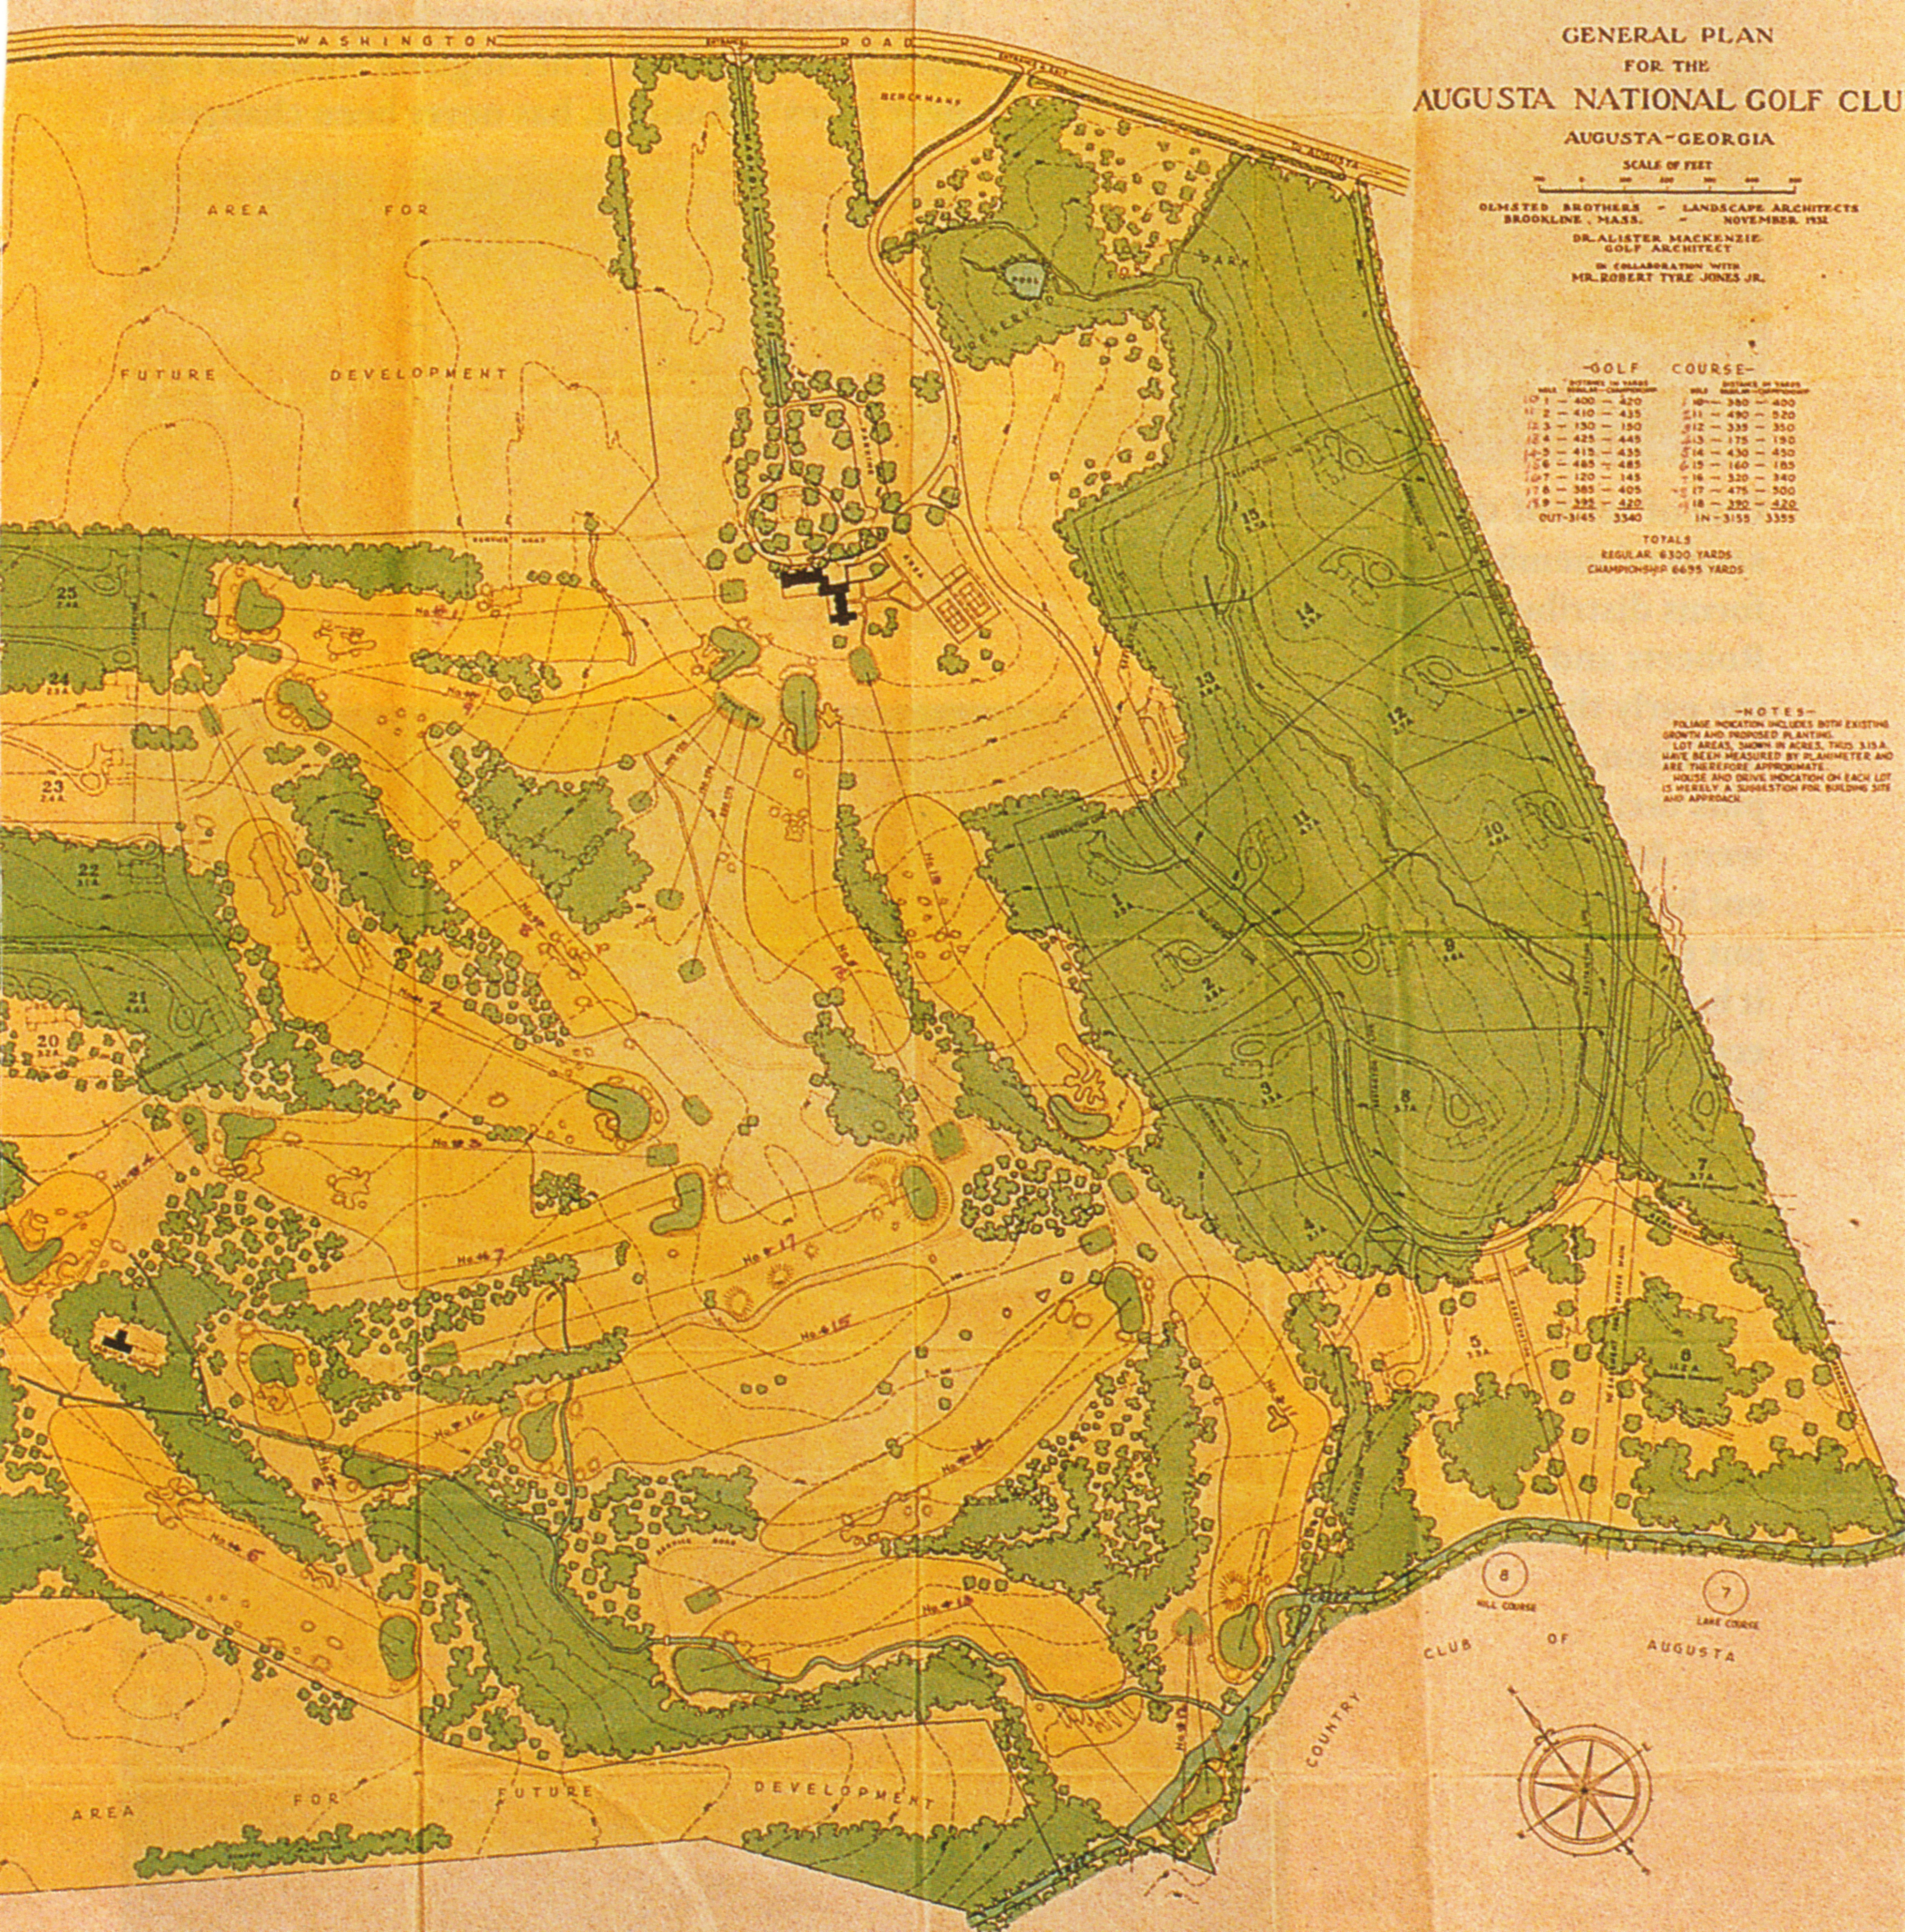 1932 Augusta National real-estate development plan, prepared for the club by Olmsted Bros.